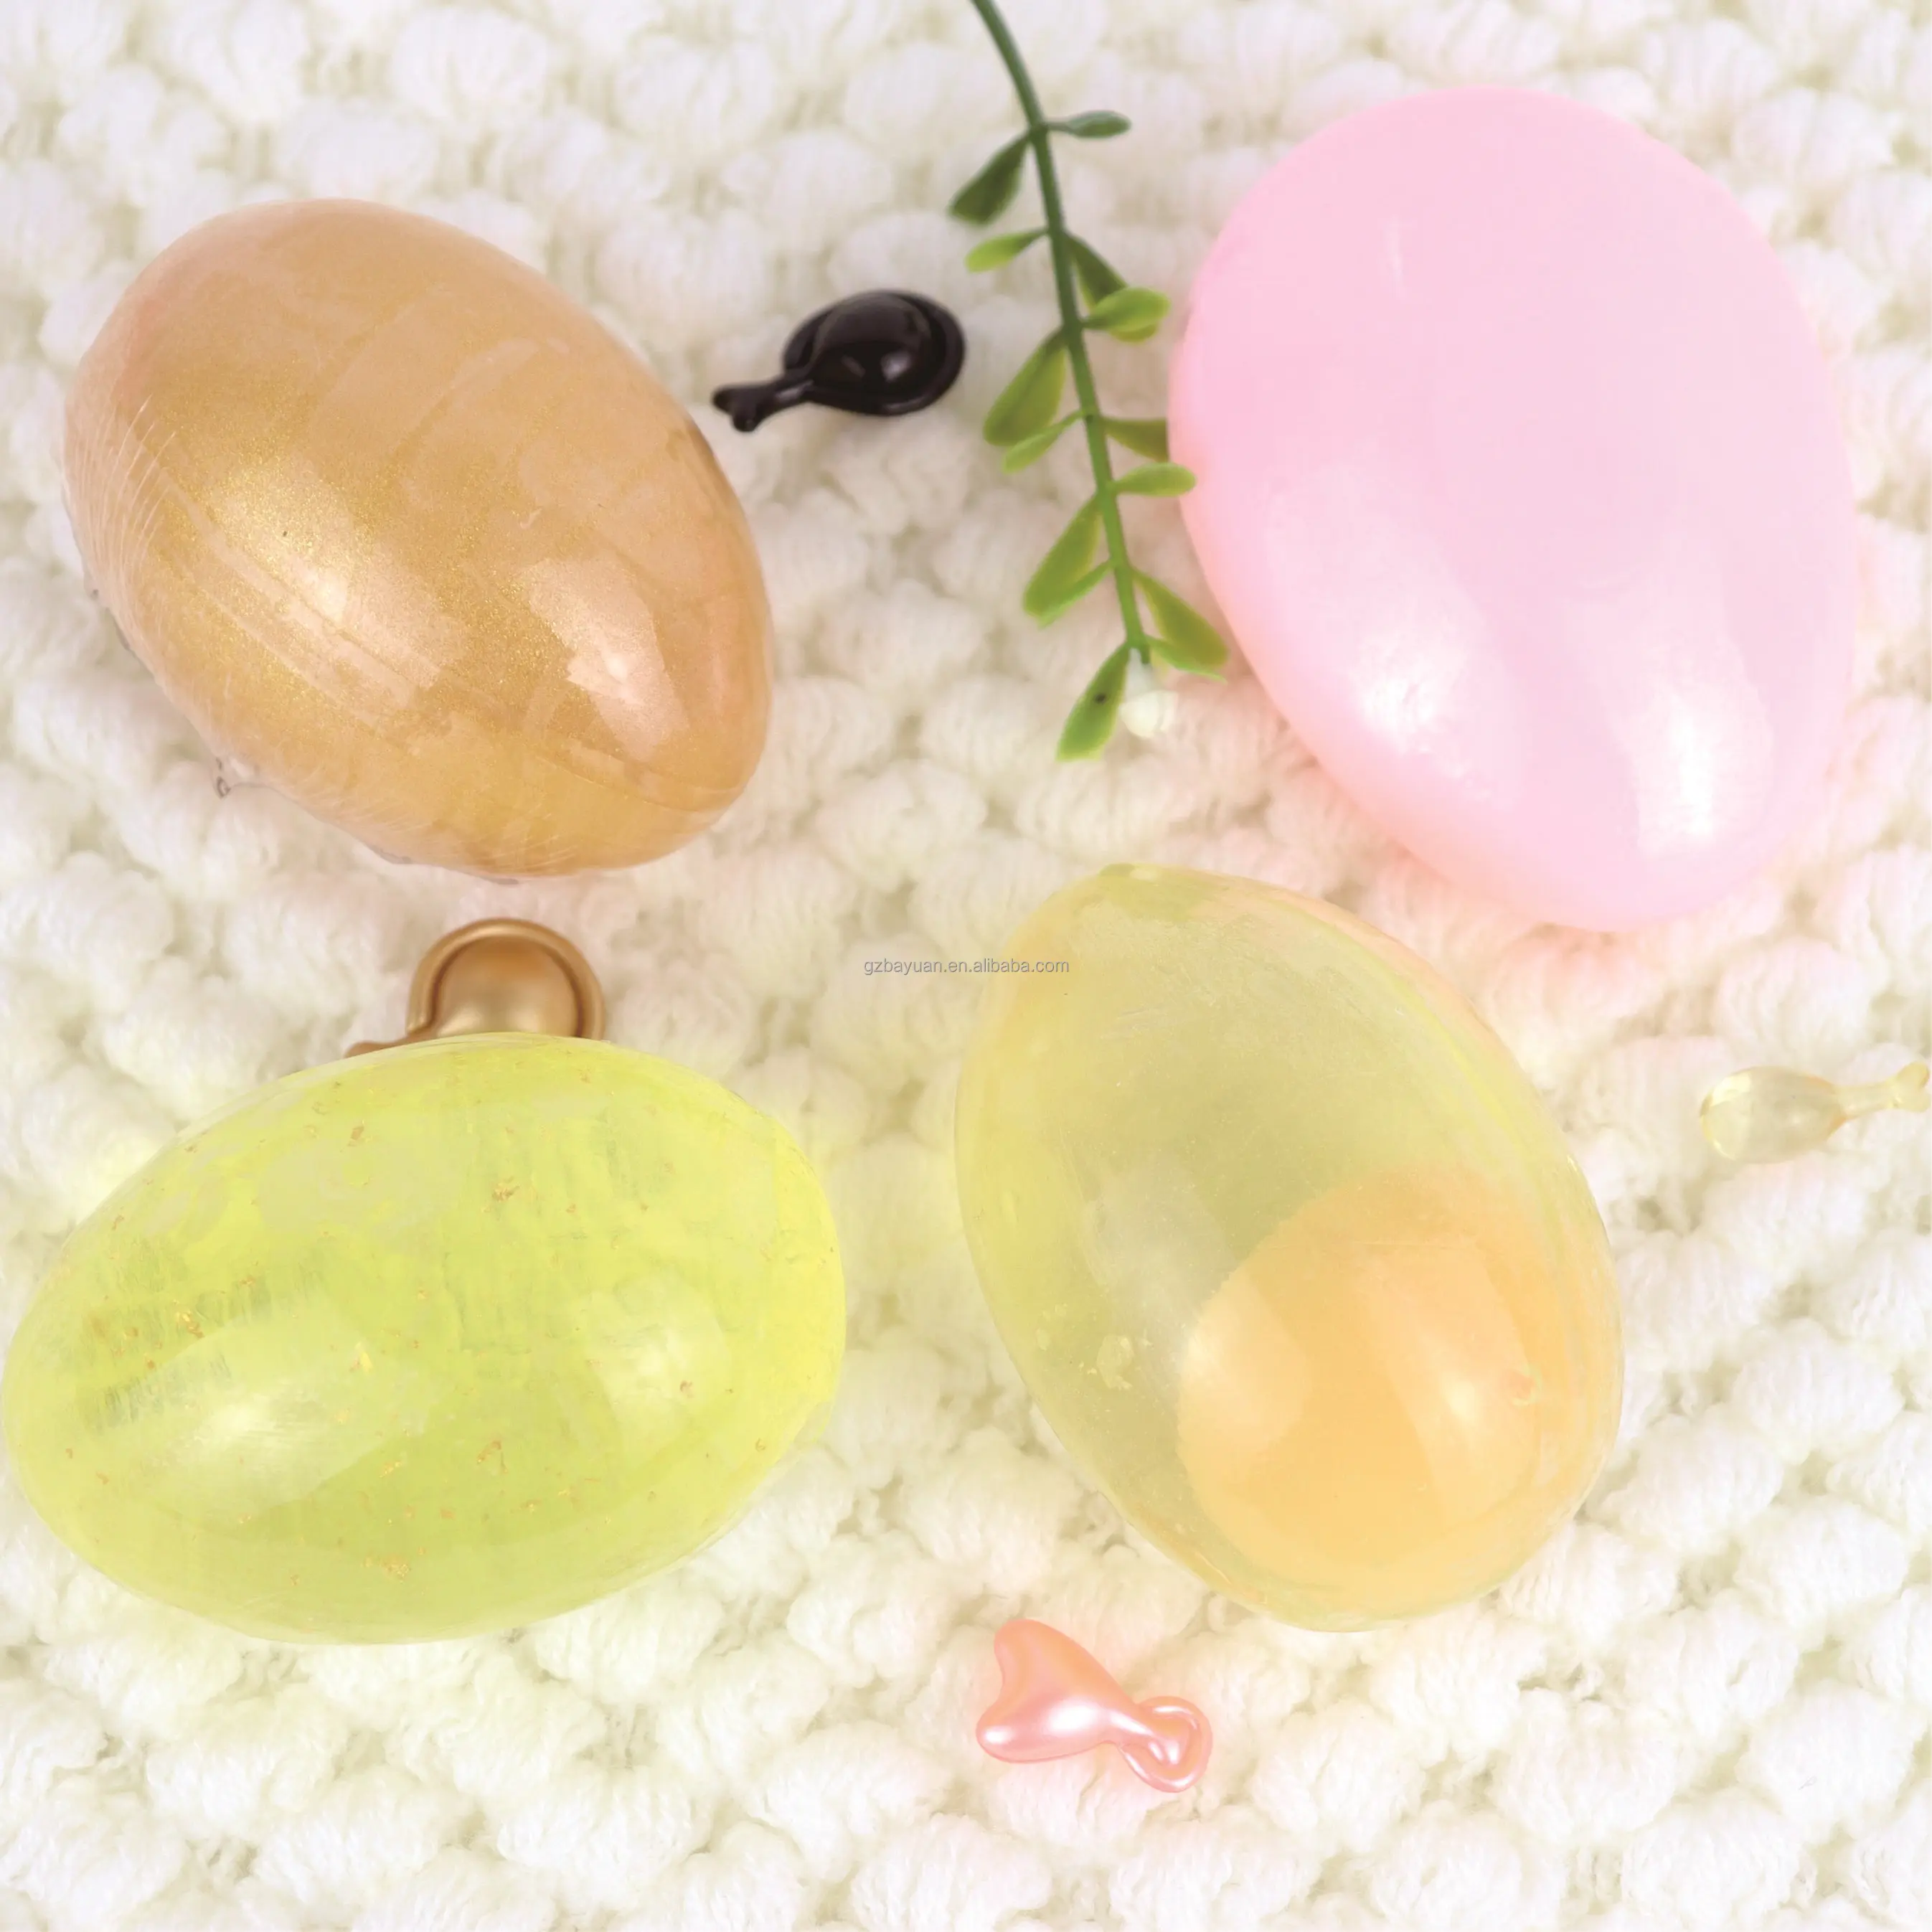 Skin Care Collagen Whitening Egg Soap 100g 24K Gold Foil Pink Beauty Handmade Bath Toilet Clean and Clear Soap Base Body Face